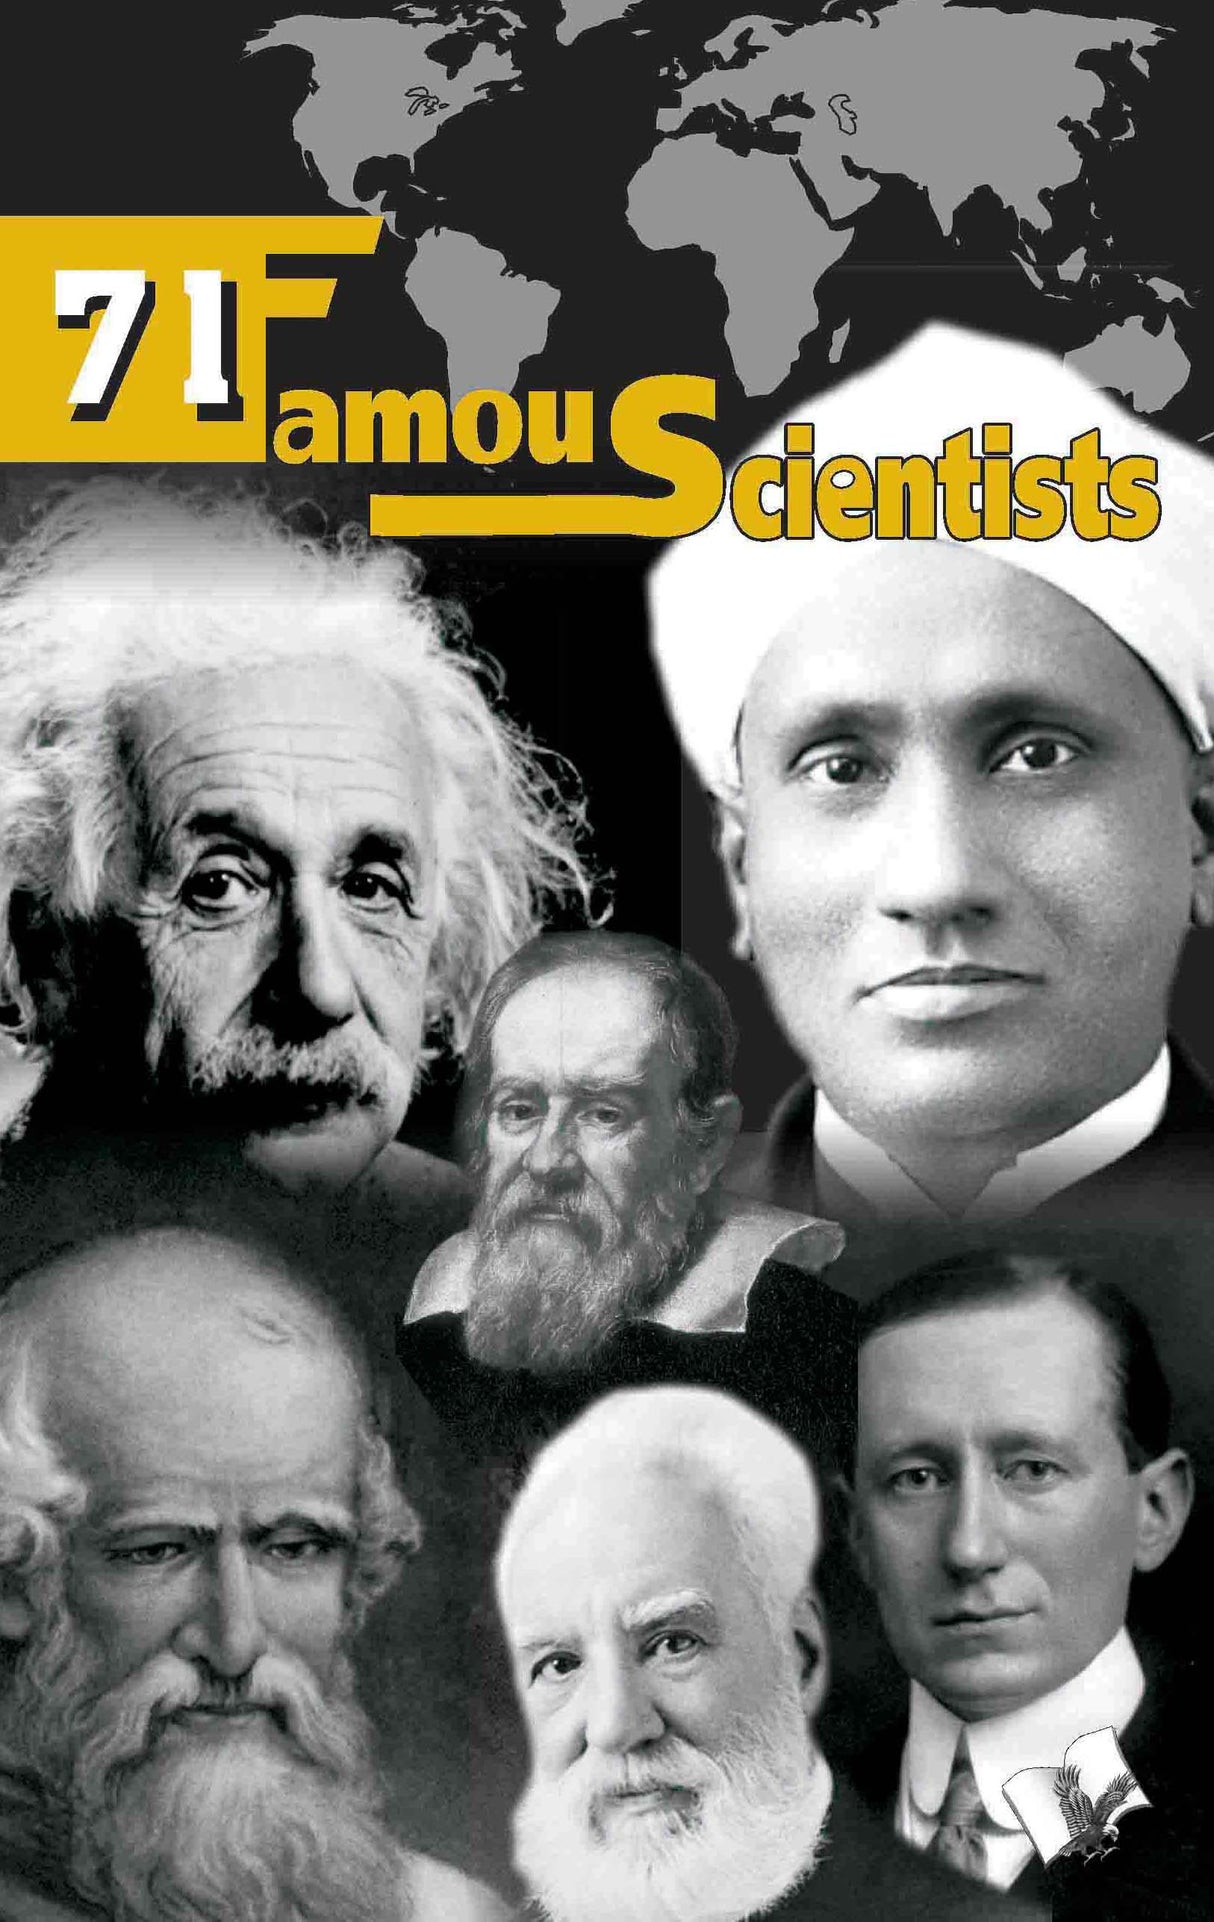 71 Famous Scientists: Who spent their lives for our better tomorrow